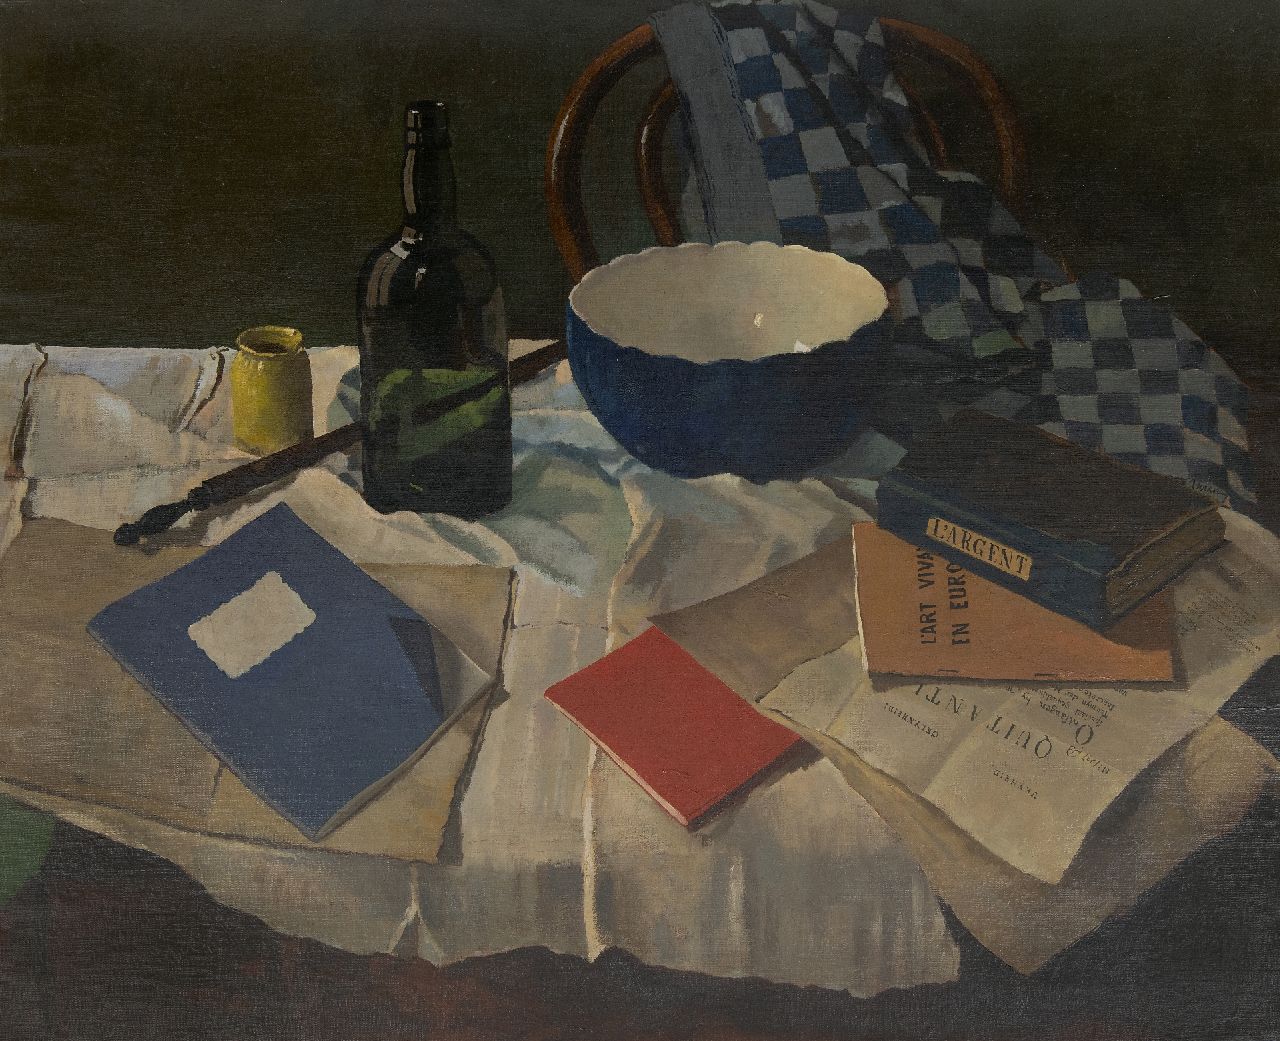 Verkoren L.  | Lucas Verkoren | Paintings offered for sale | A still life with a bowl and books, oil on canvas 75.7 x 91.5 cm, signed c.r. and dated 1955